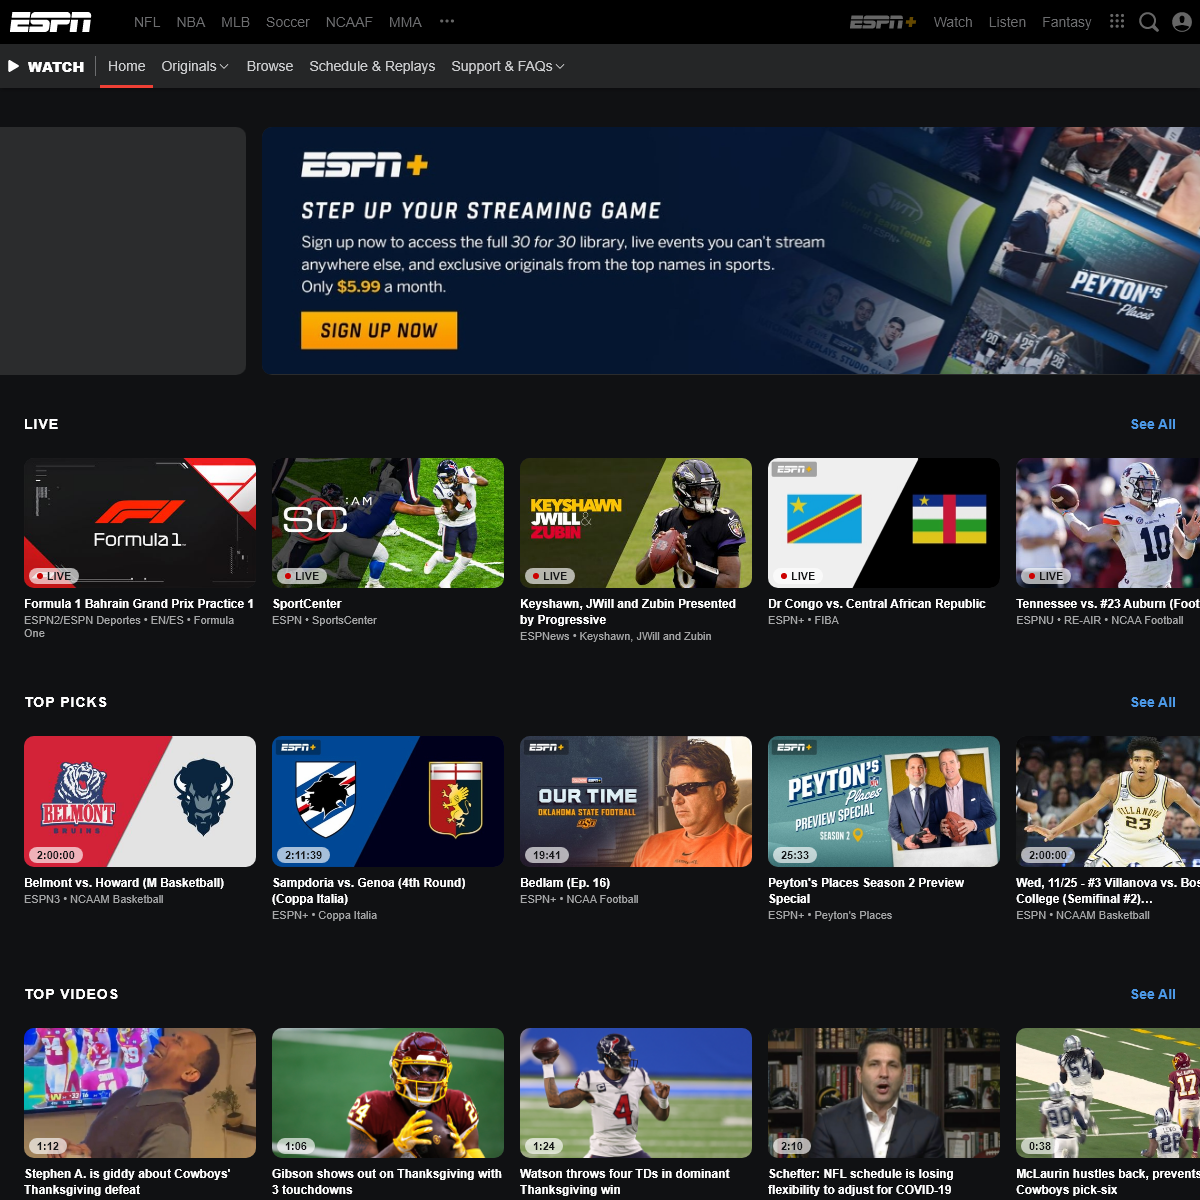 A complete backup of watchespn.com